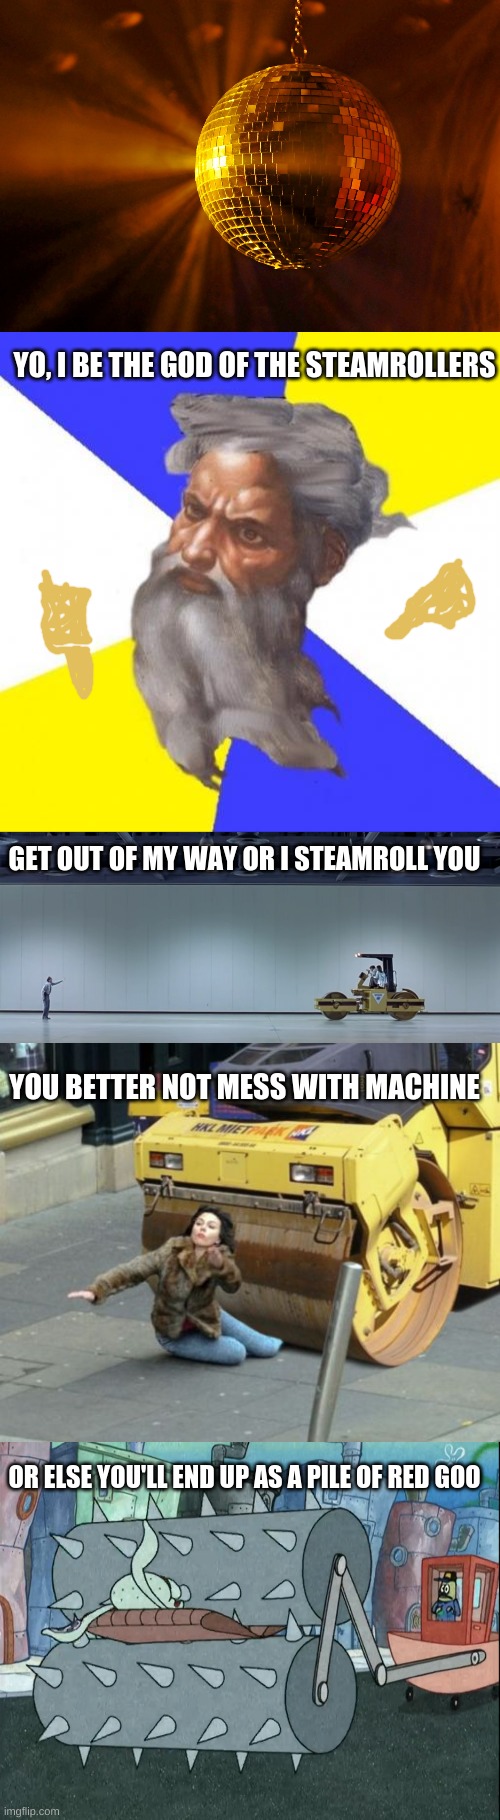 Rap | YO, I BE THE GOD OF THE STEAMROLLERS GET OUT OF MY WAY OR I STEAMROLL YOU YOU BETTER NOT MESS WITH MACHINE OR ELSE YOU'LL END UP AS A PILE O | image tagged in disco ball,memes,advice god,austin powers steamroller,steamroller,squidward gets crushed by steamroller | made w/ Imgflip meme maker